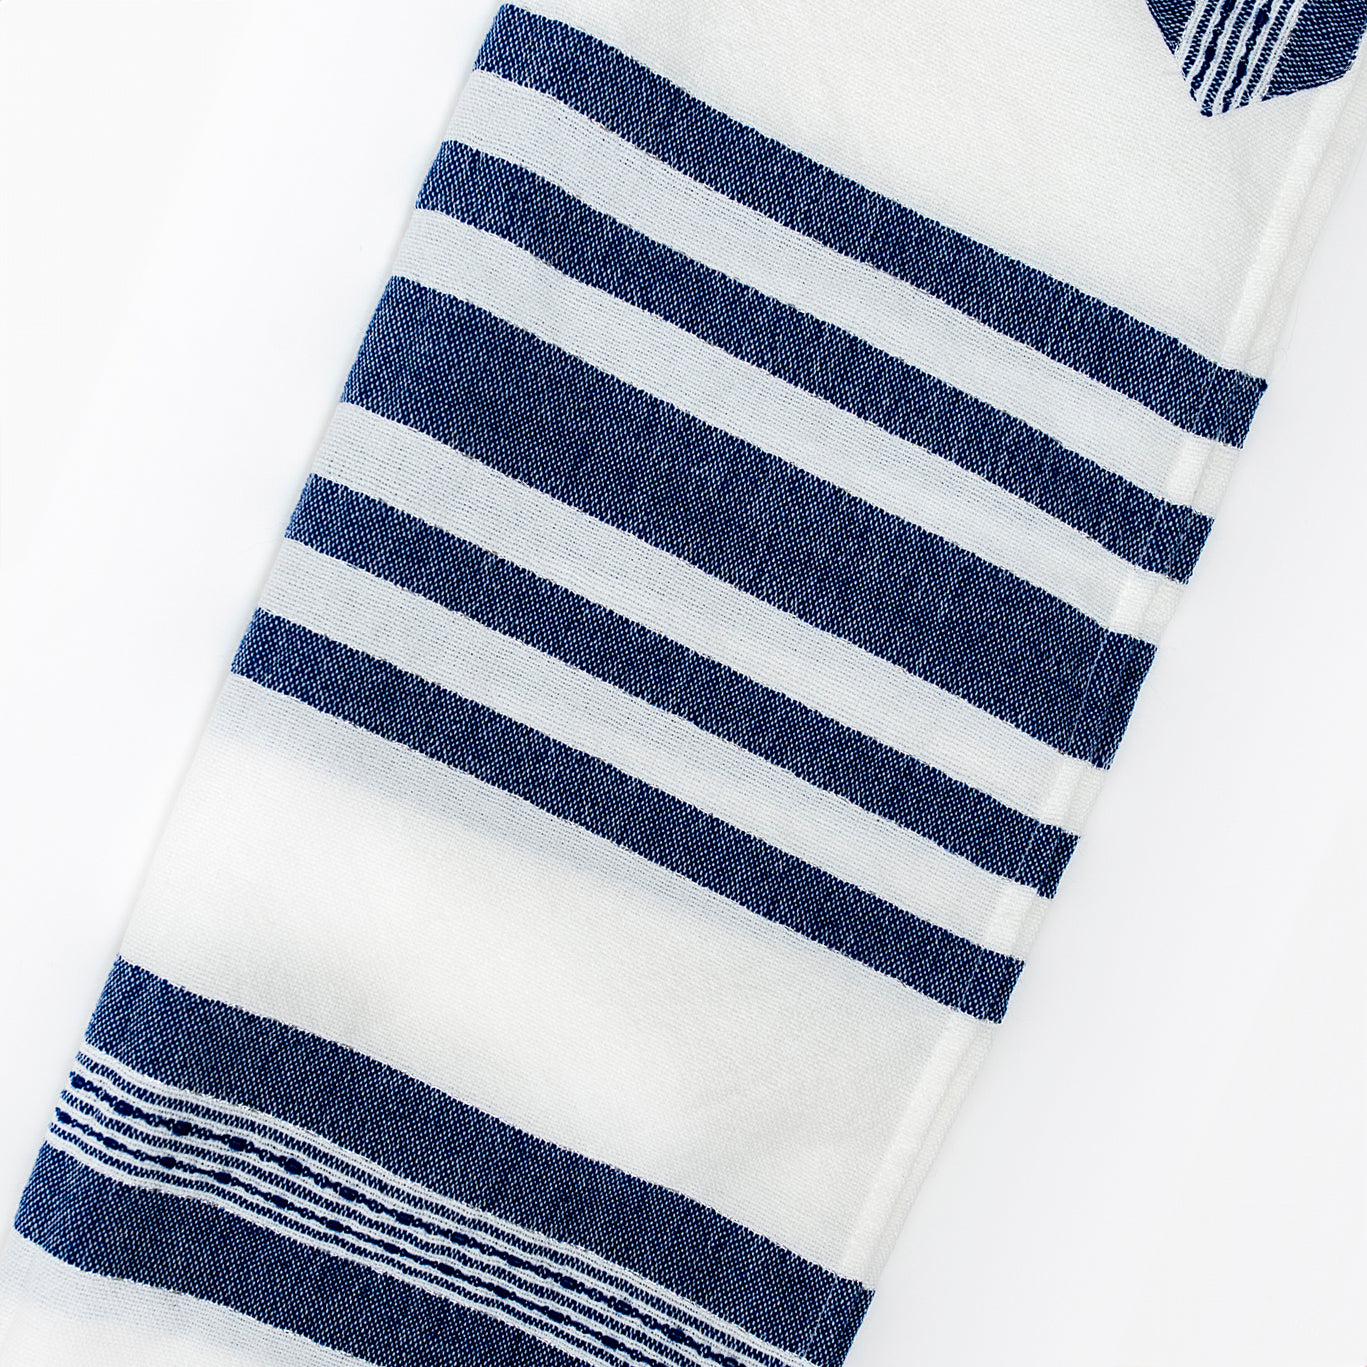 David - Wool Tallit - Wide Blue stripes with Silver